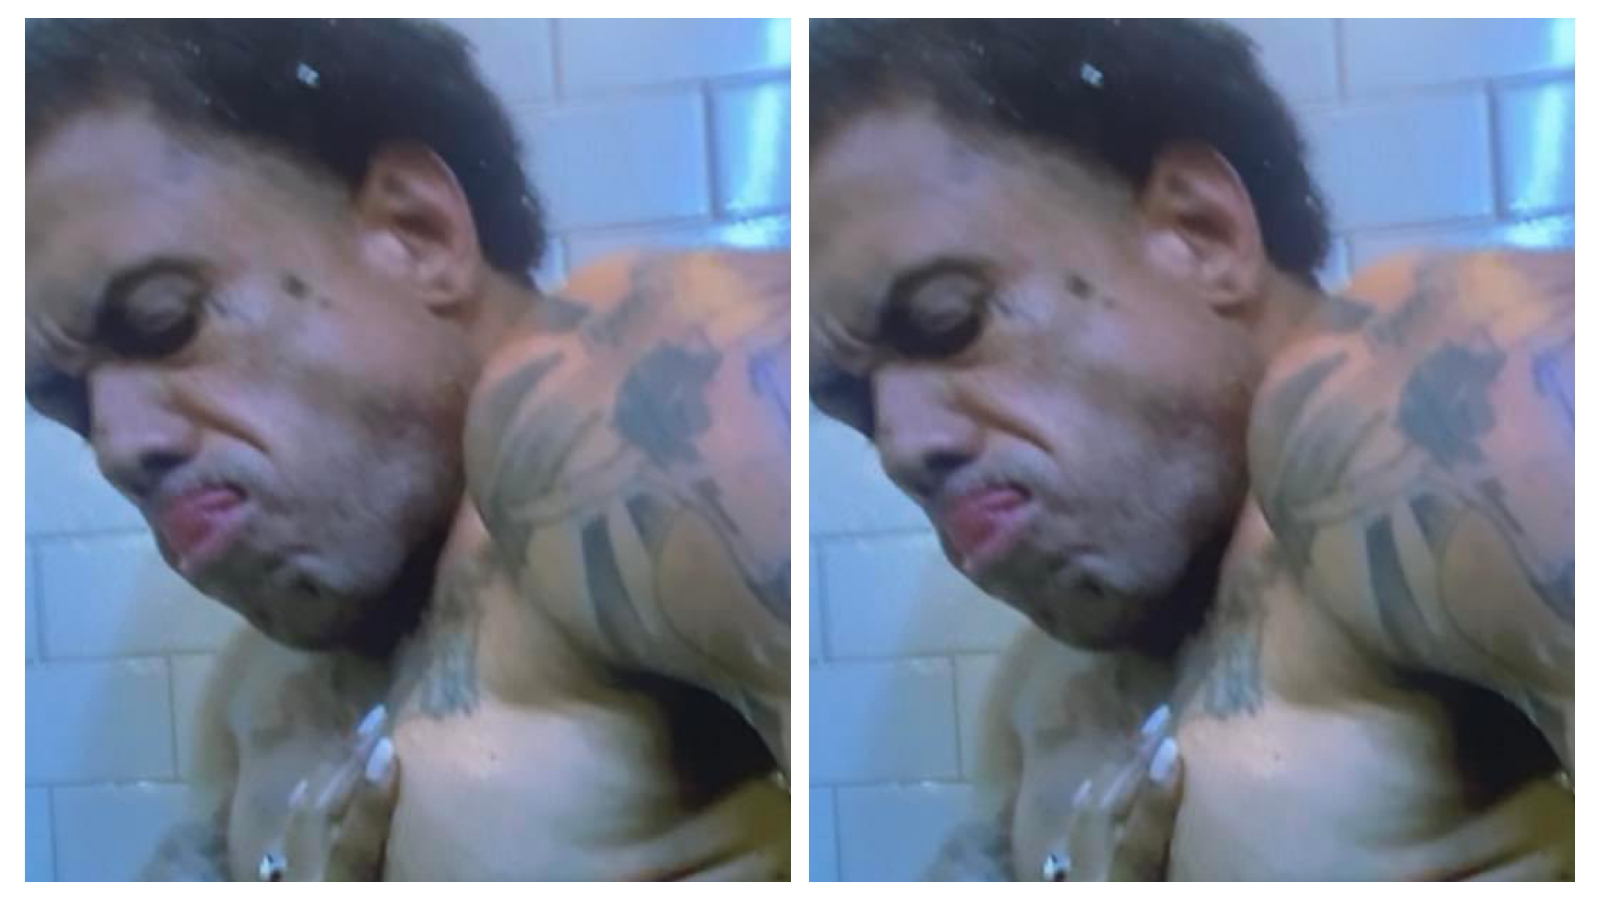 Benzino Getting His Dick Sucked By A Woman In Threesomes Tubi Movie Sex Scene